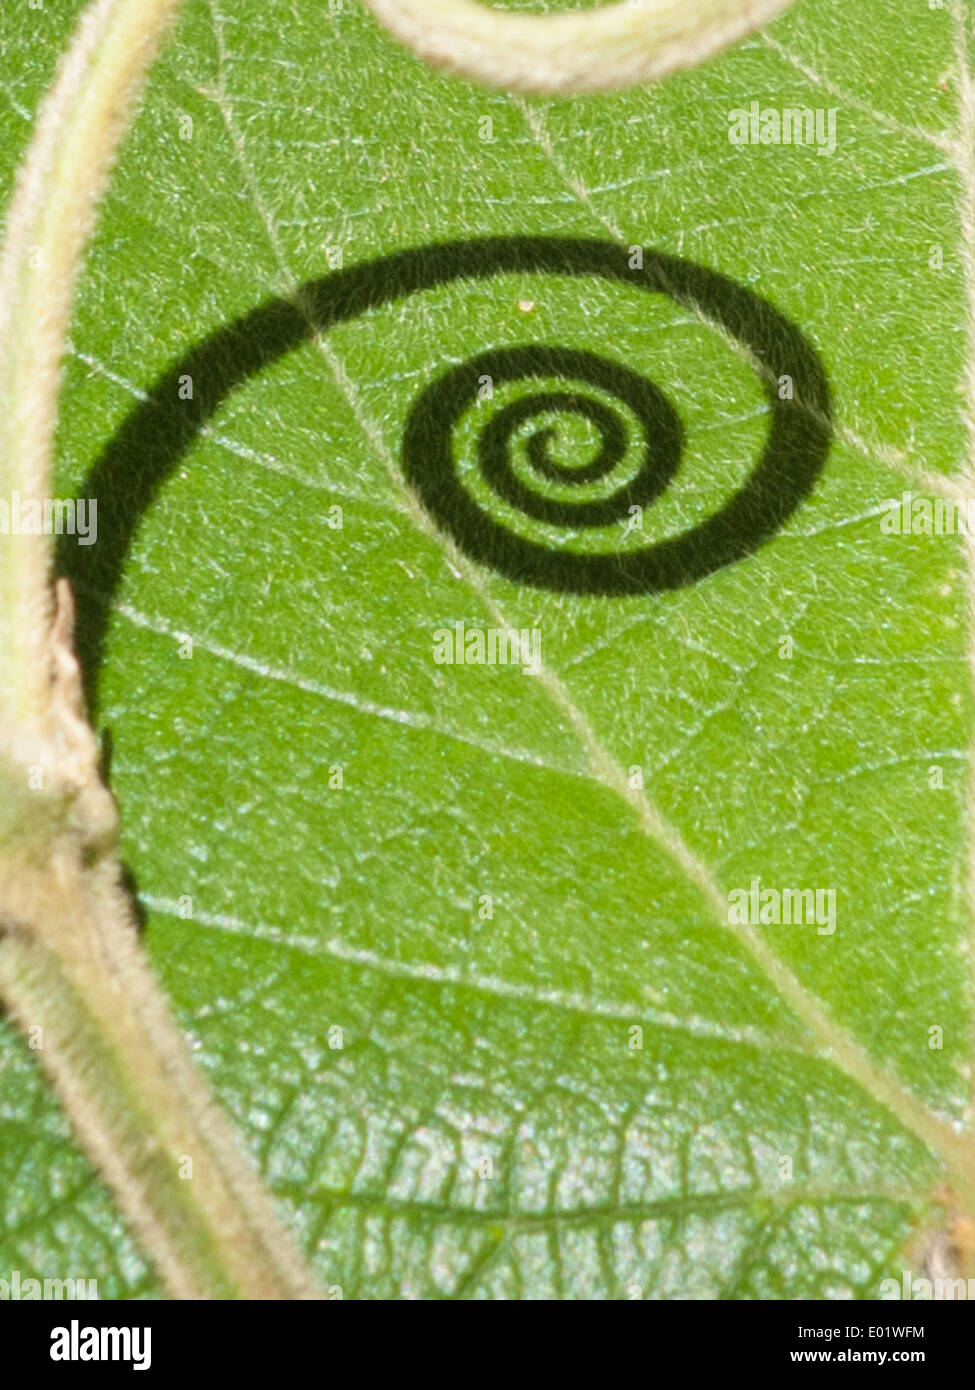 Curled shadow of a new shoot opening on a green leaf, Mata Atlantica forest. Stock Photo